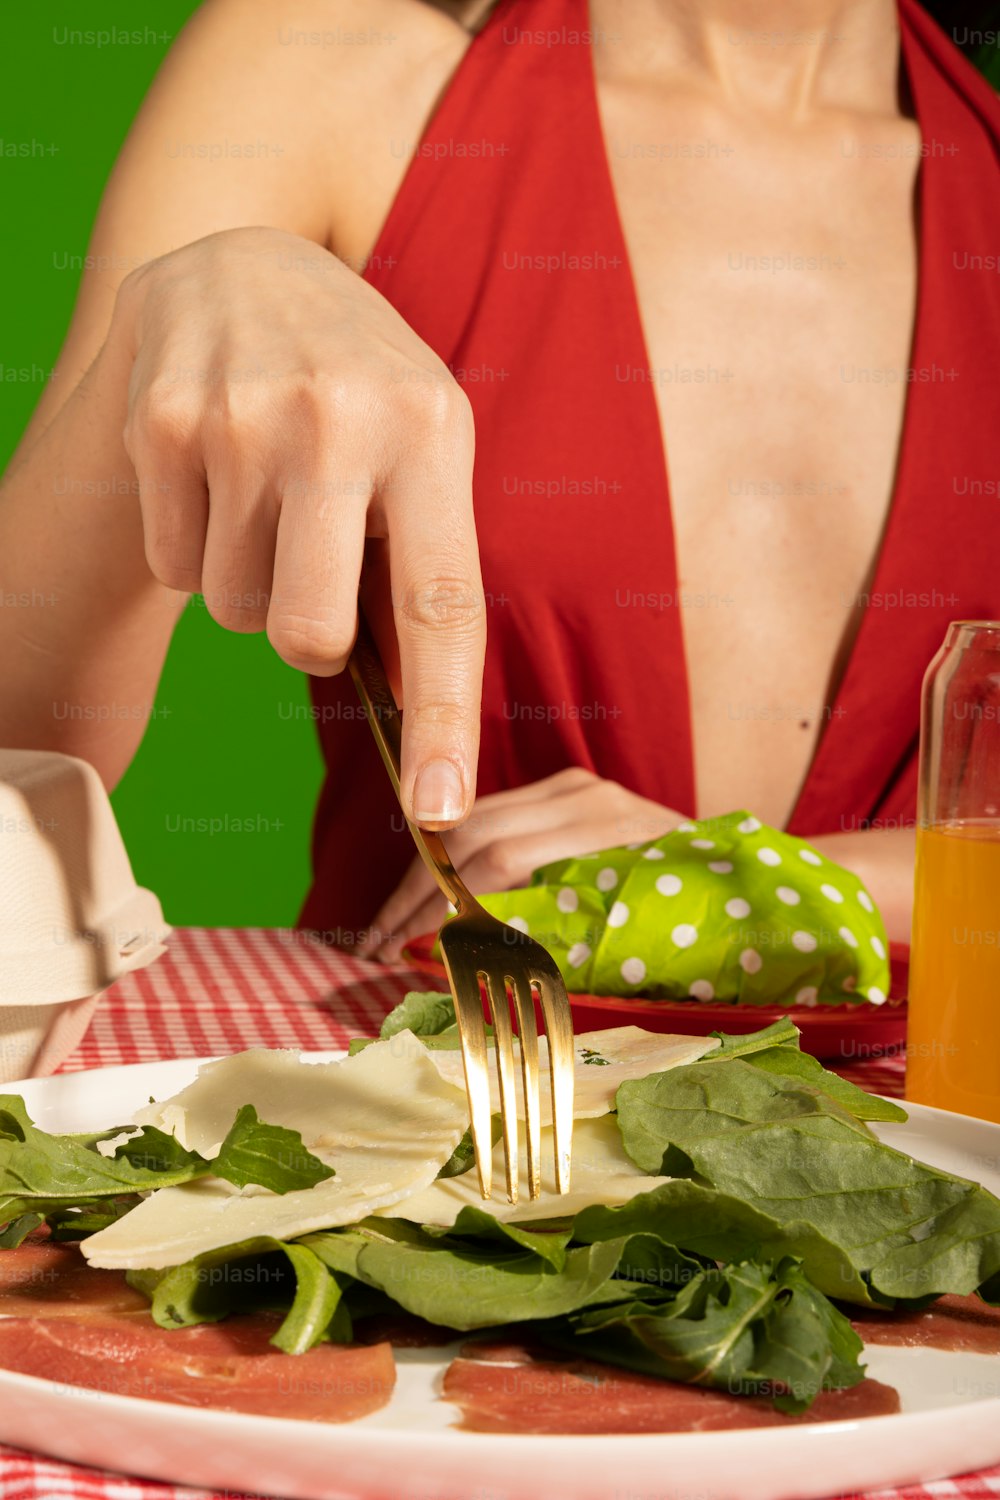 a woman in a red dress is eating a salad